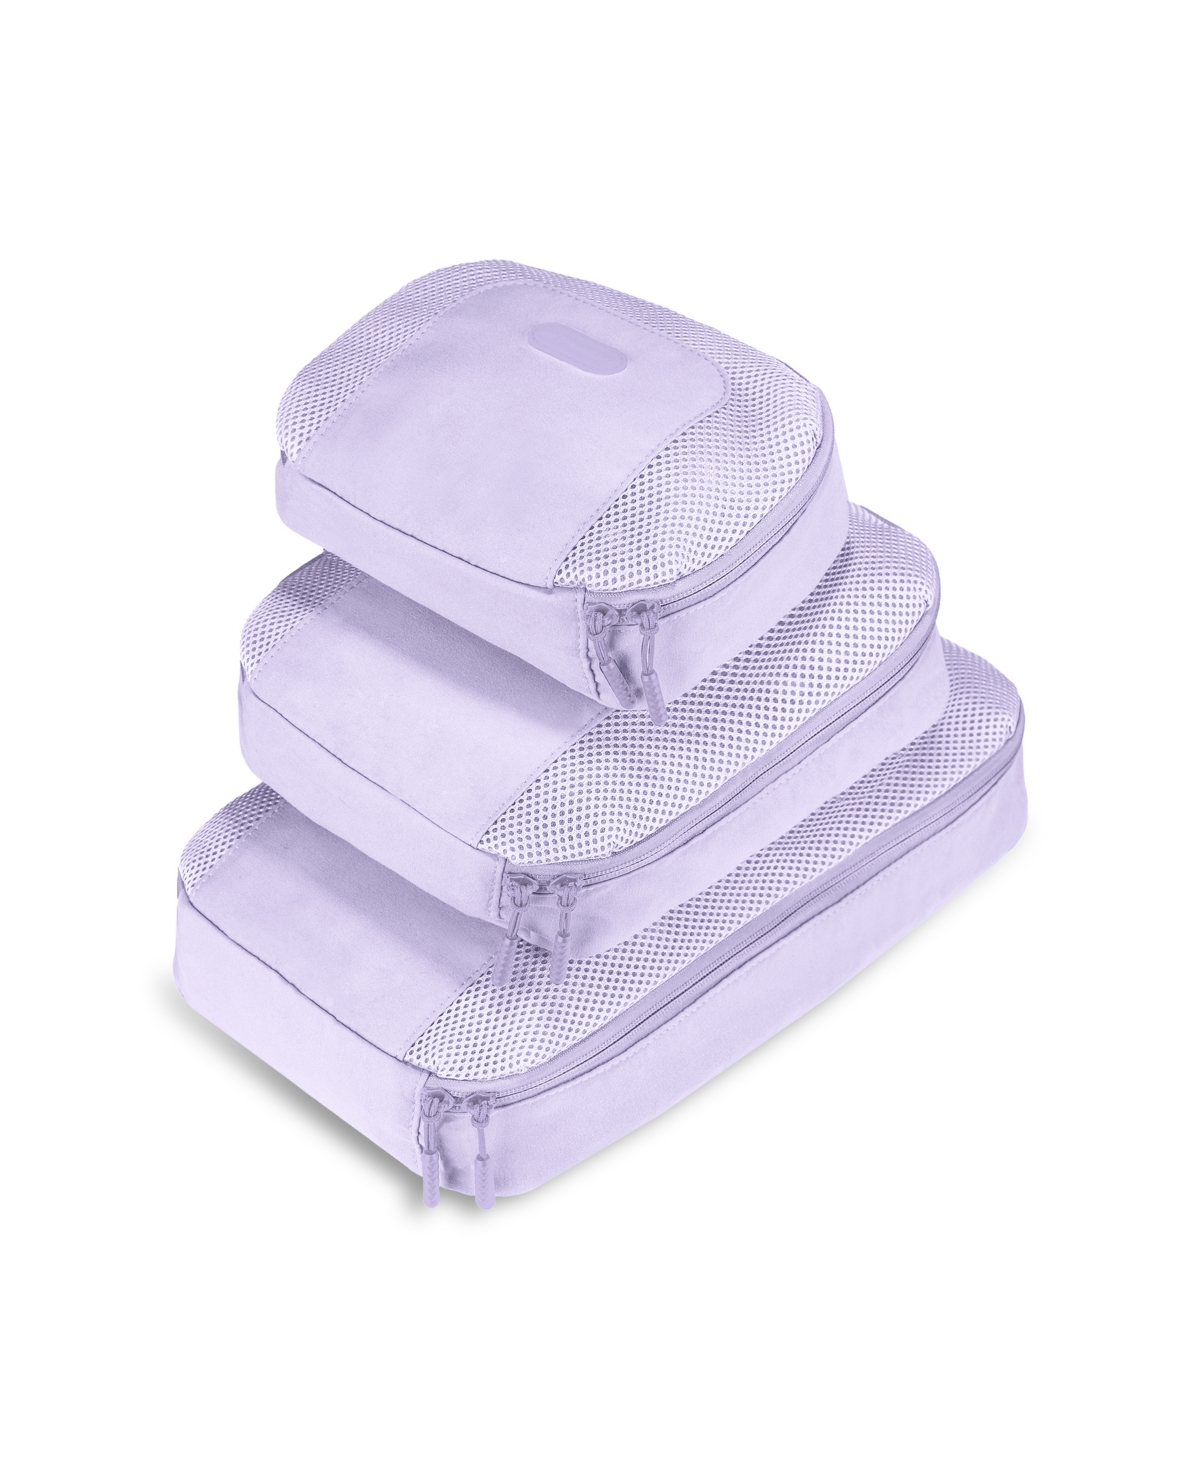 Travelon Packing Cubes, Set Of 3 In Lilac